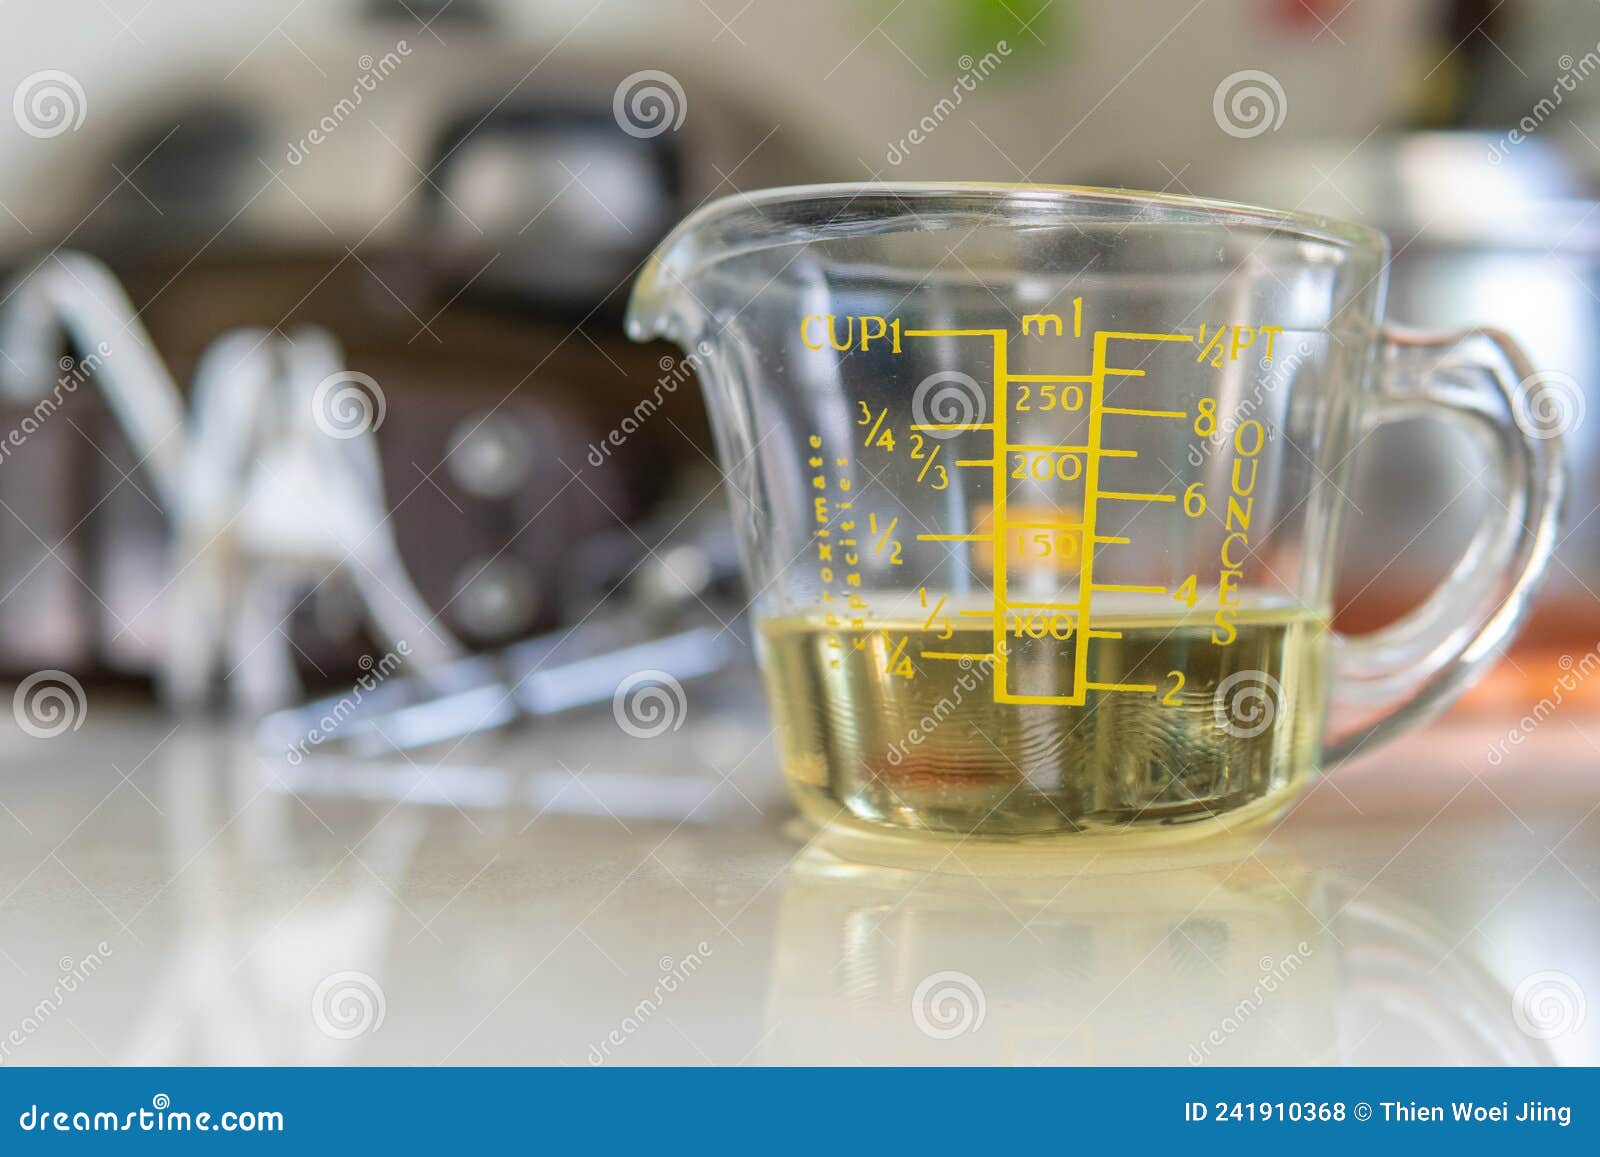 166 Cooking Oil Measuring Cup Stock Photos - Free & Royalty-Free